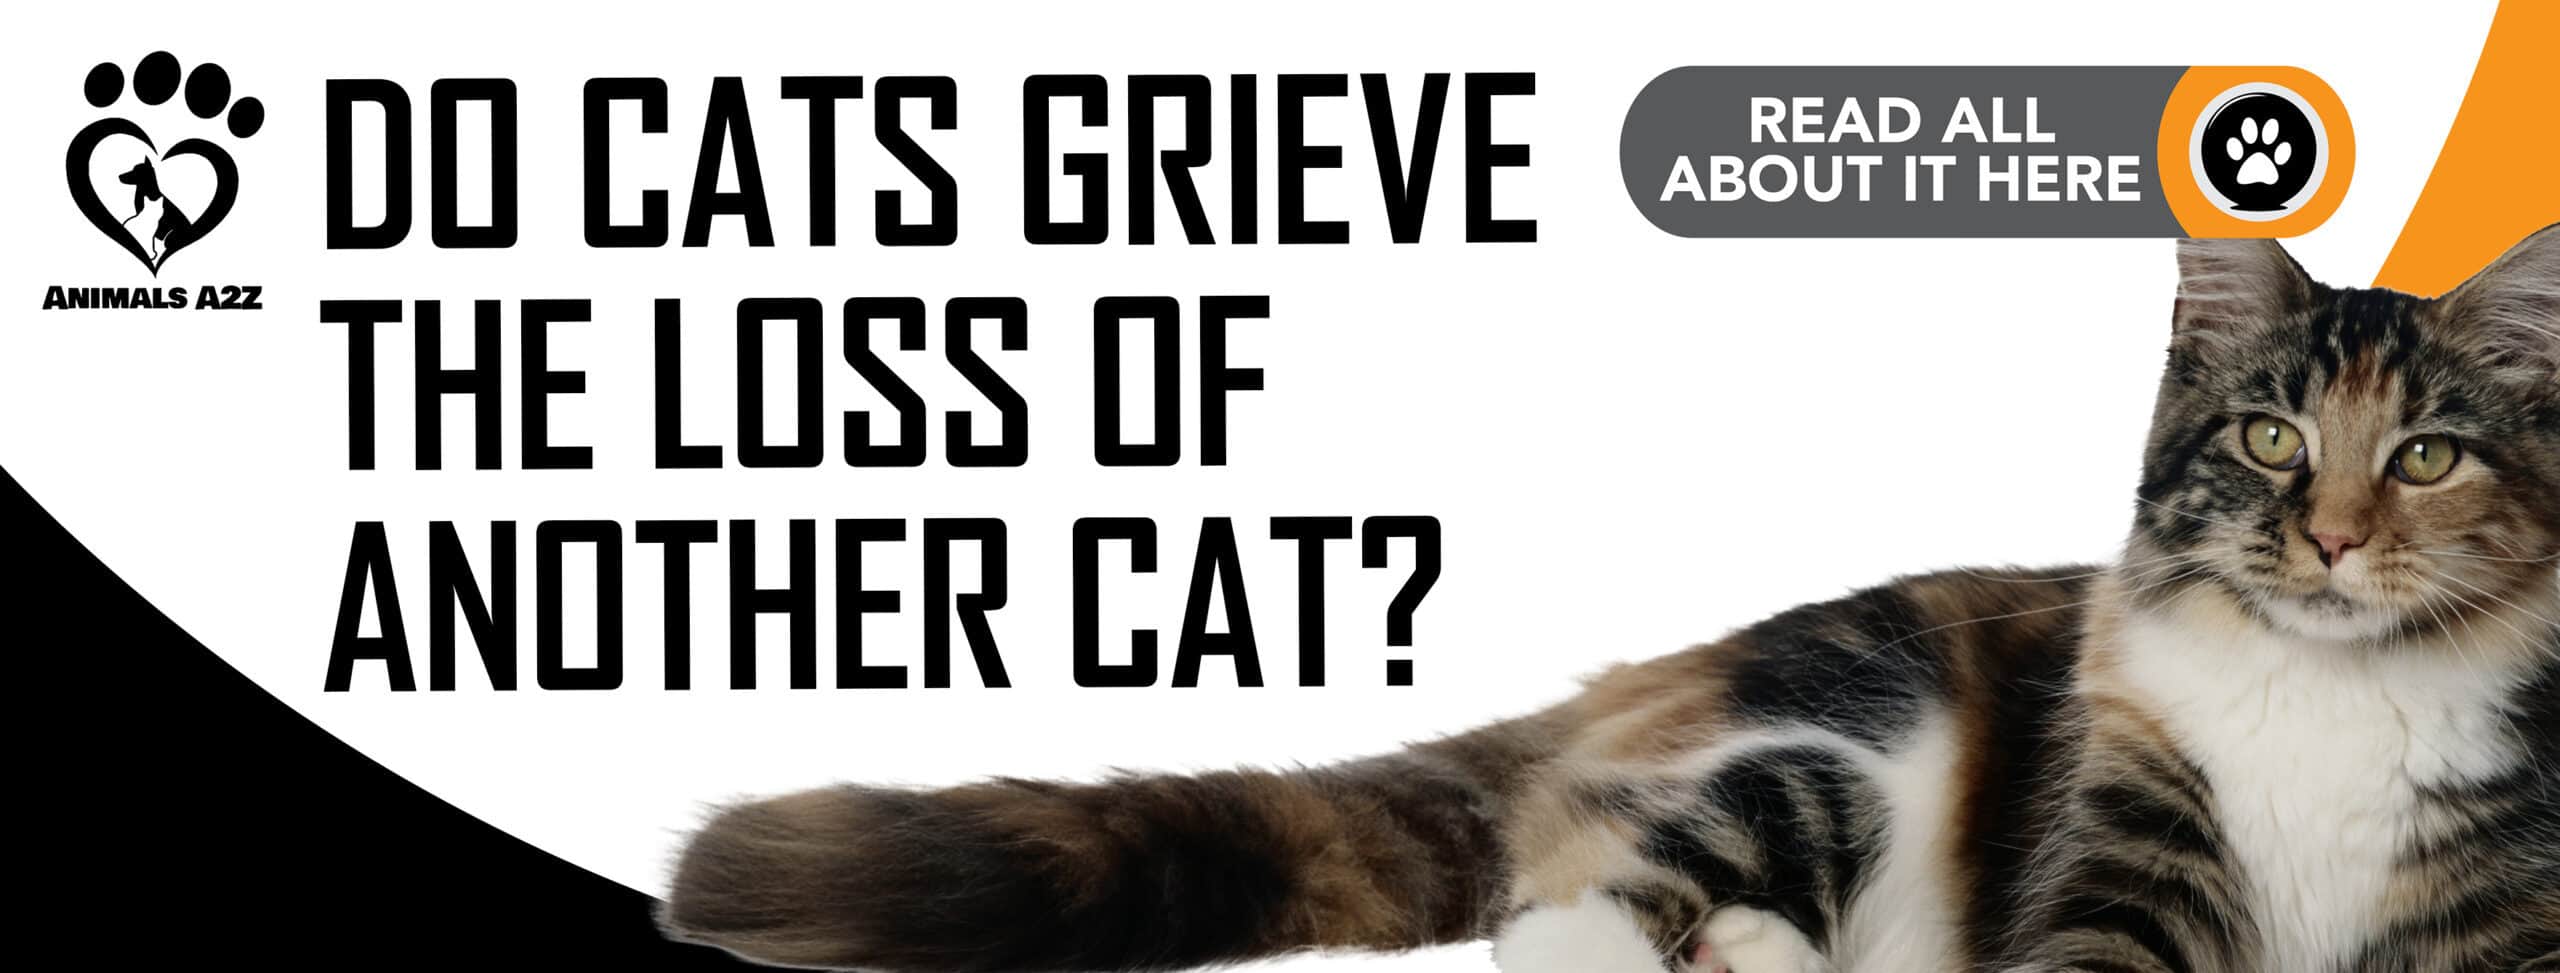 Do cats grieve the loss of another cat